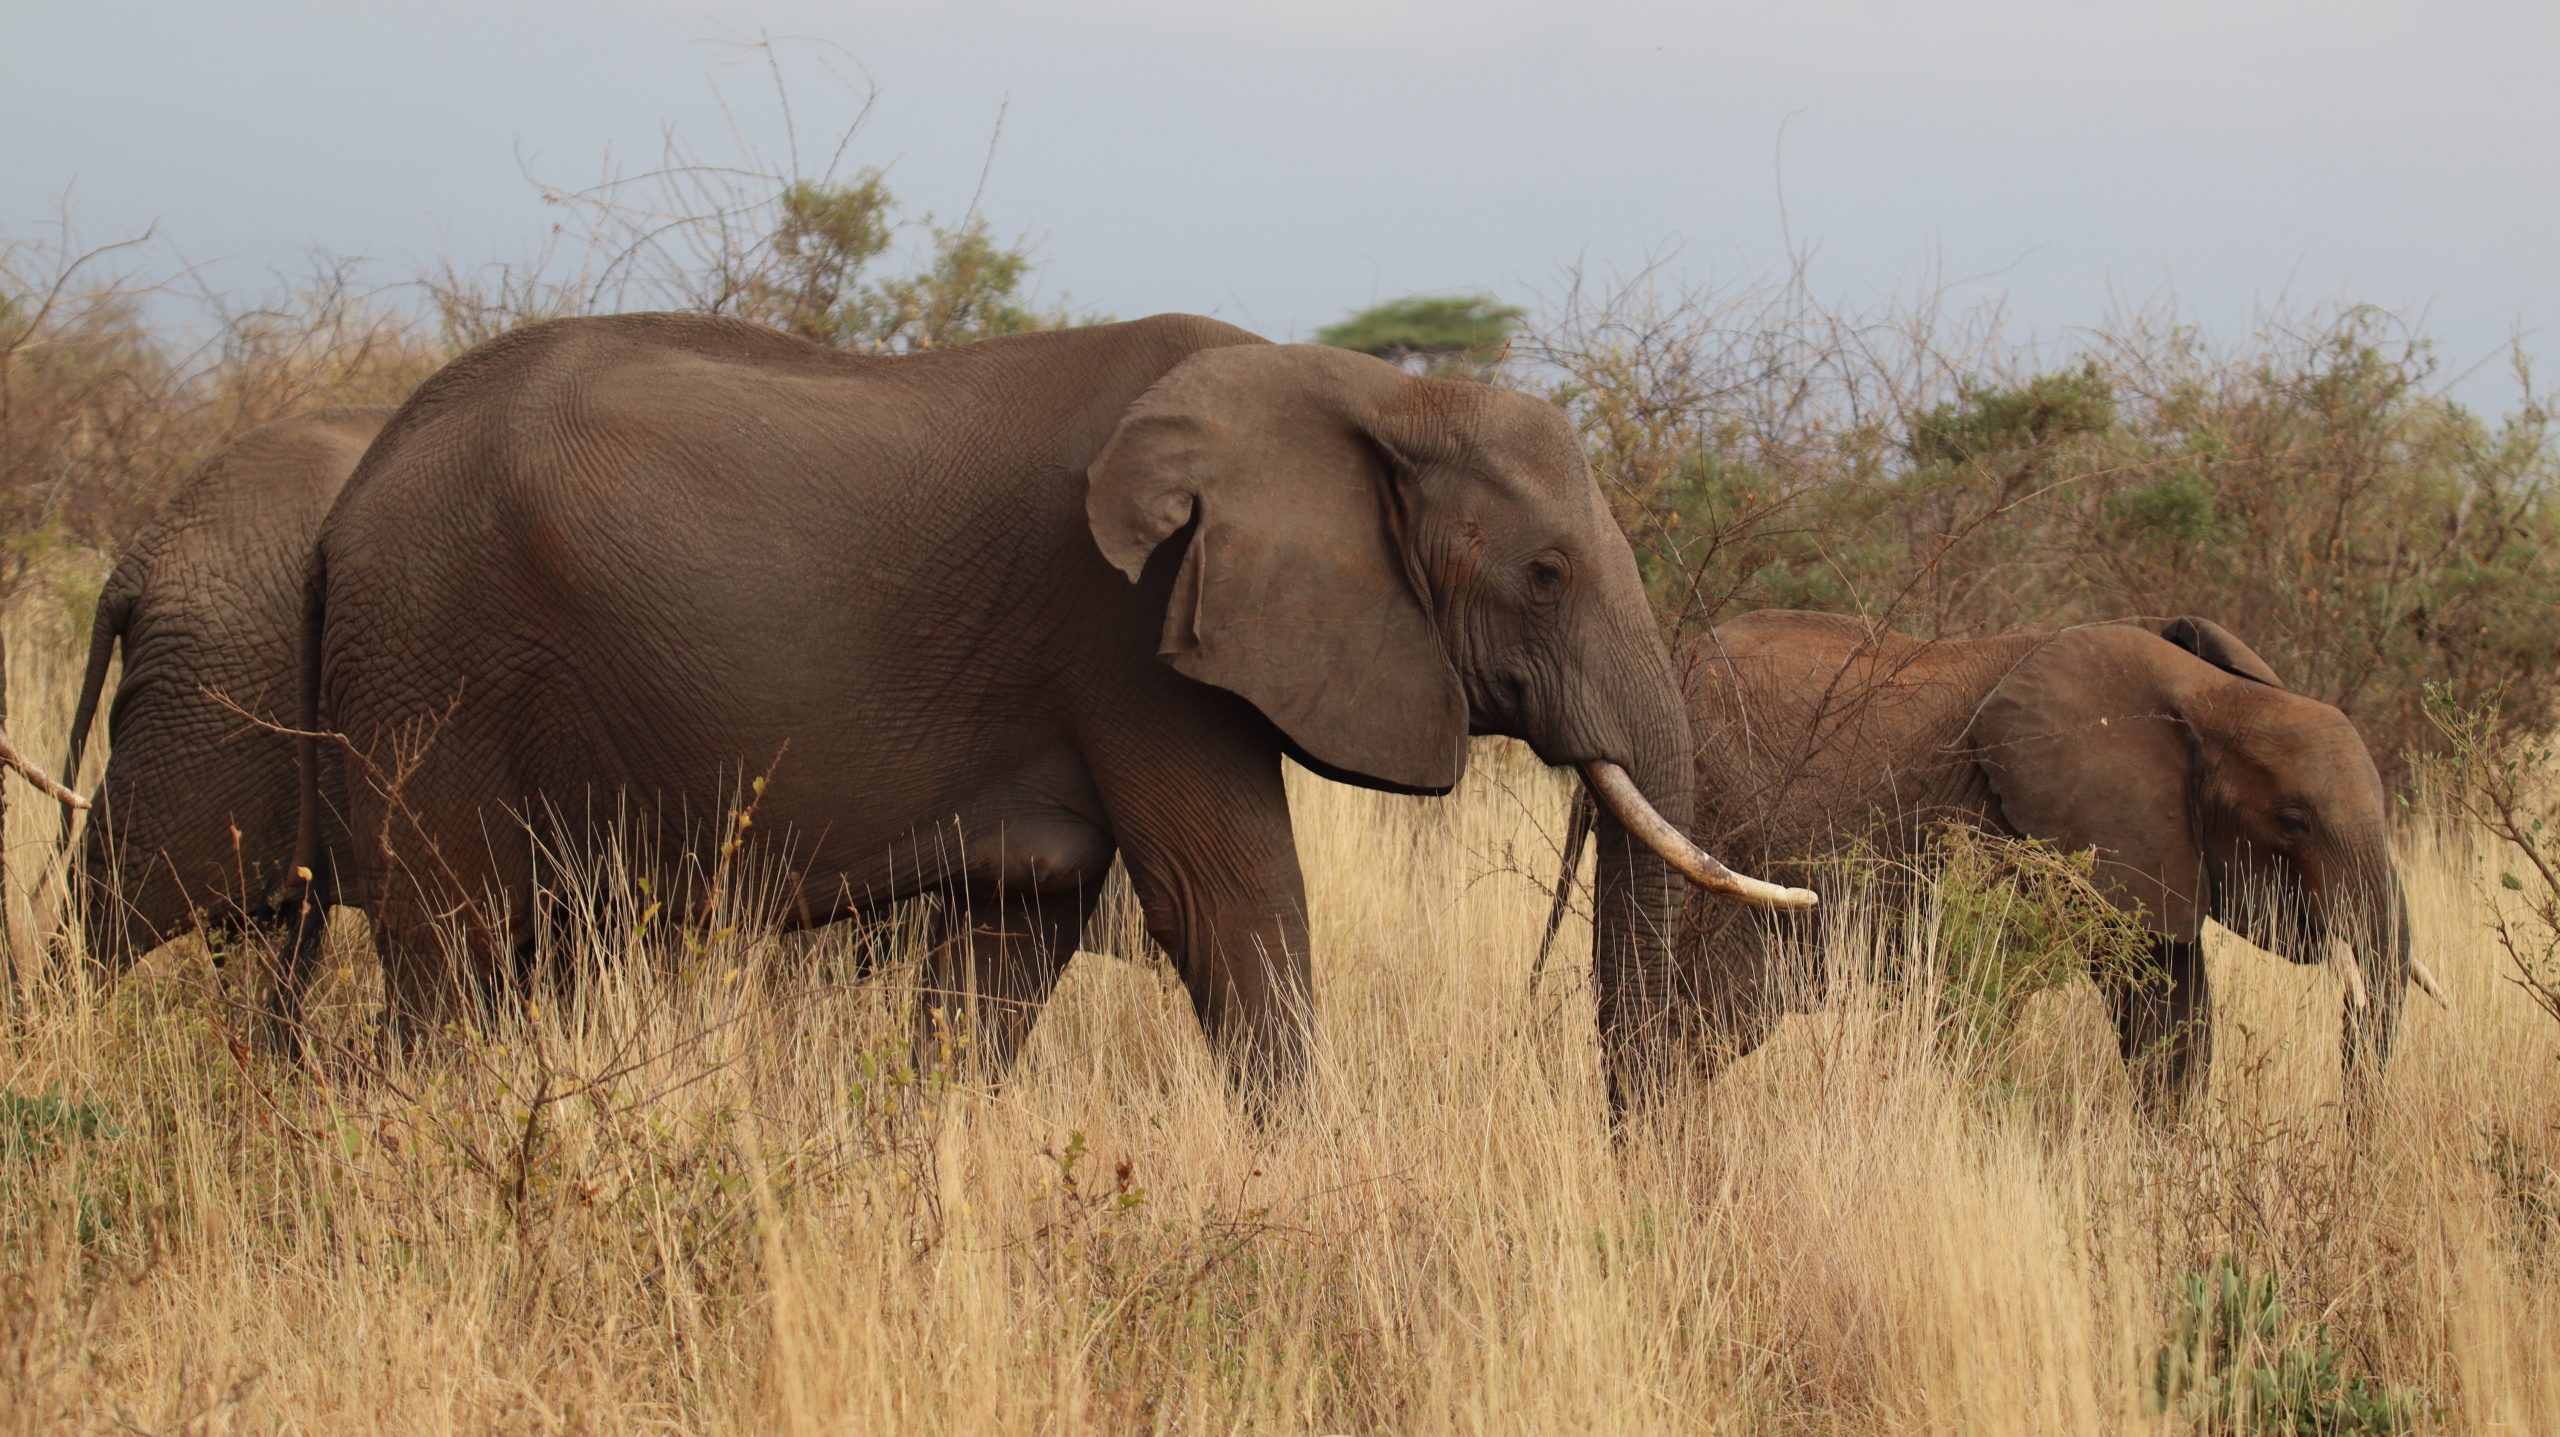 An adult and young elephant grazing in grassland